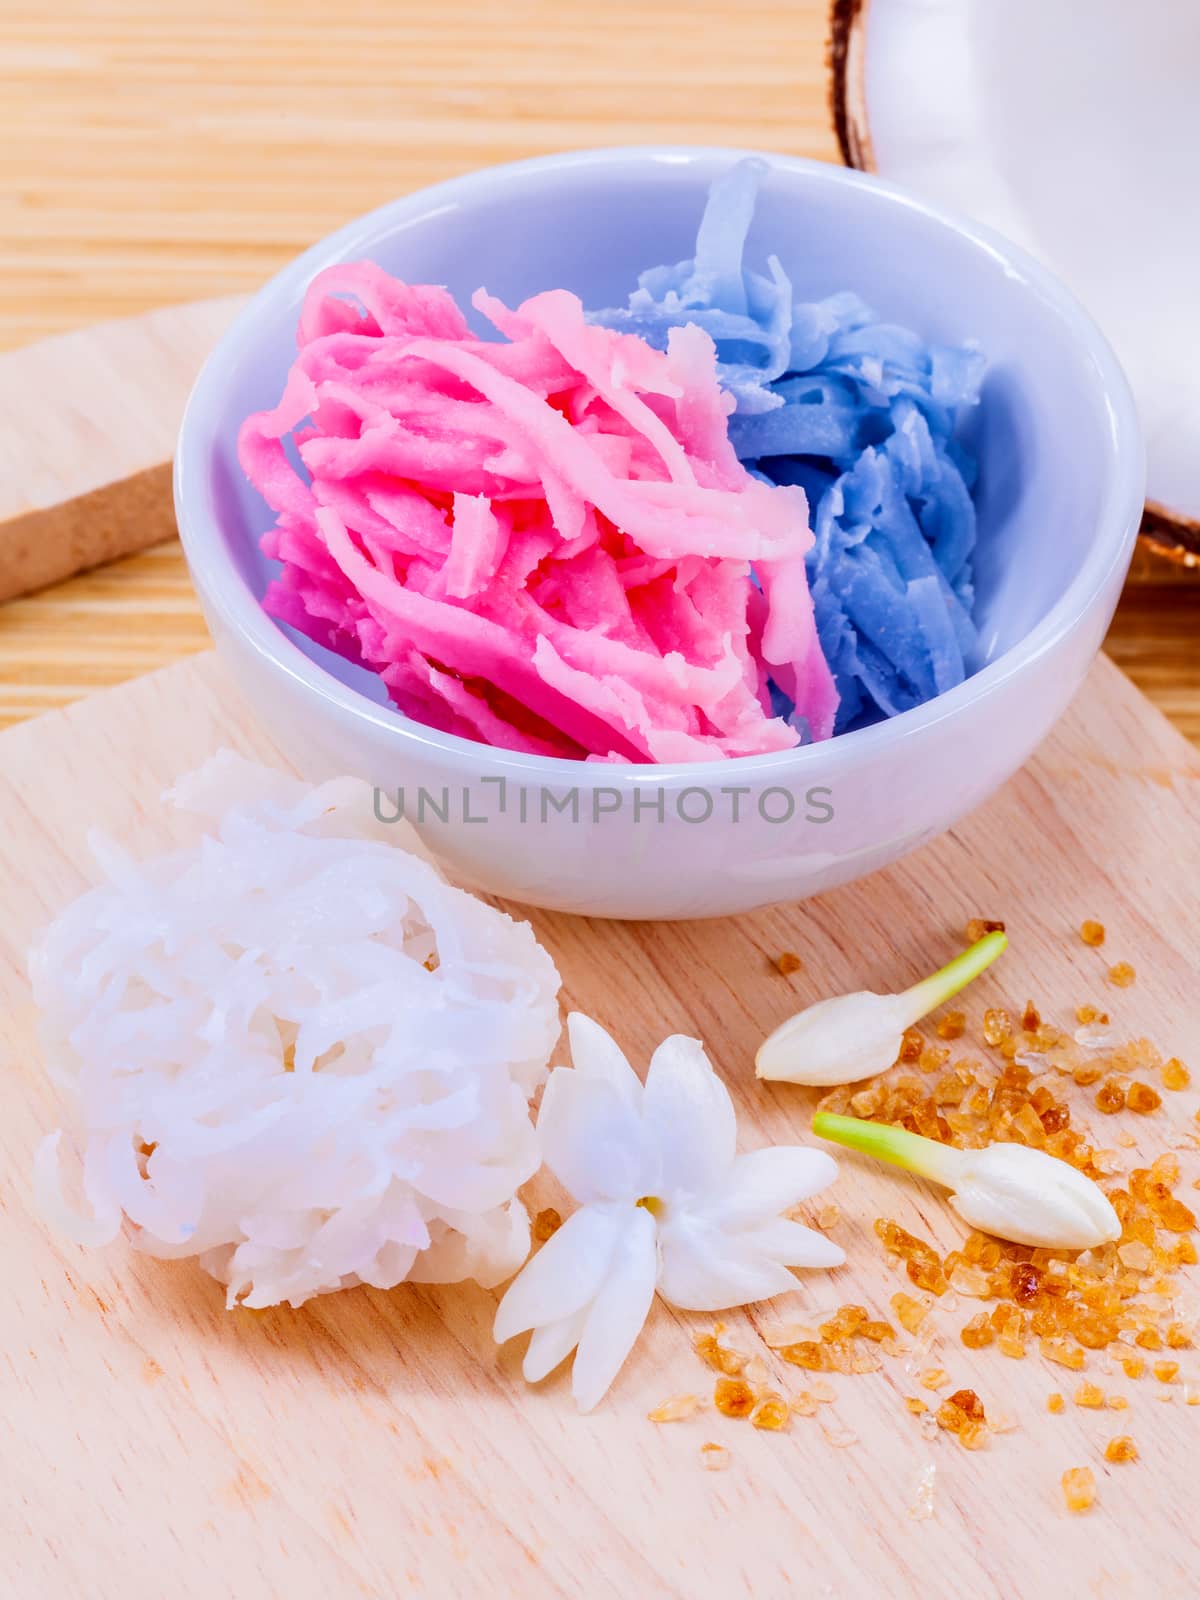 A colorful traditional coconut dessert made from grated coconut and sugar .